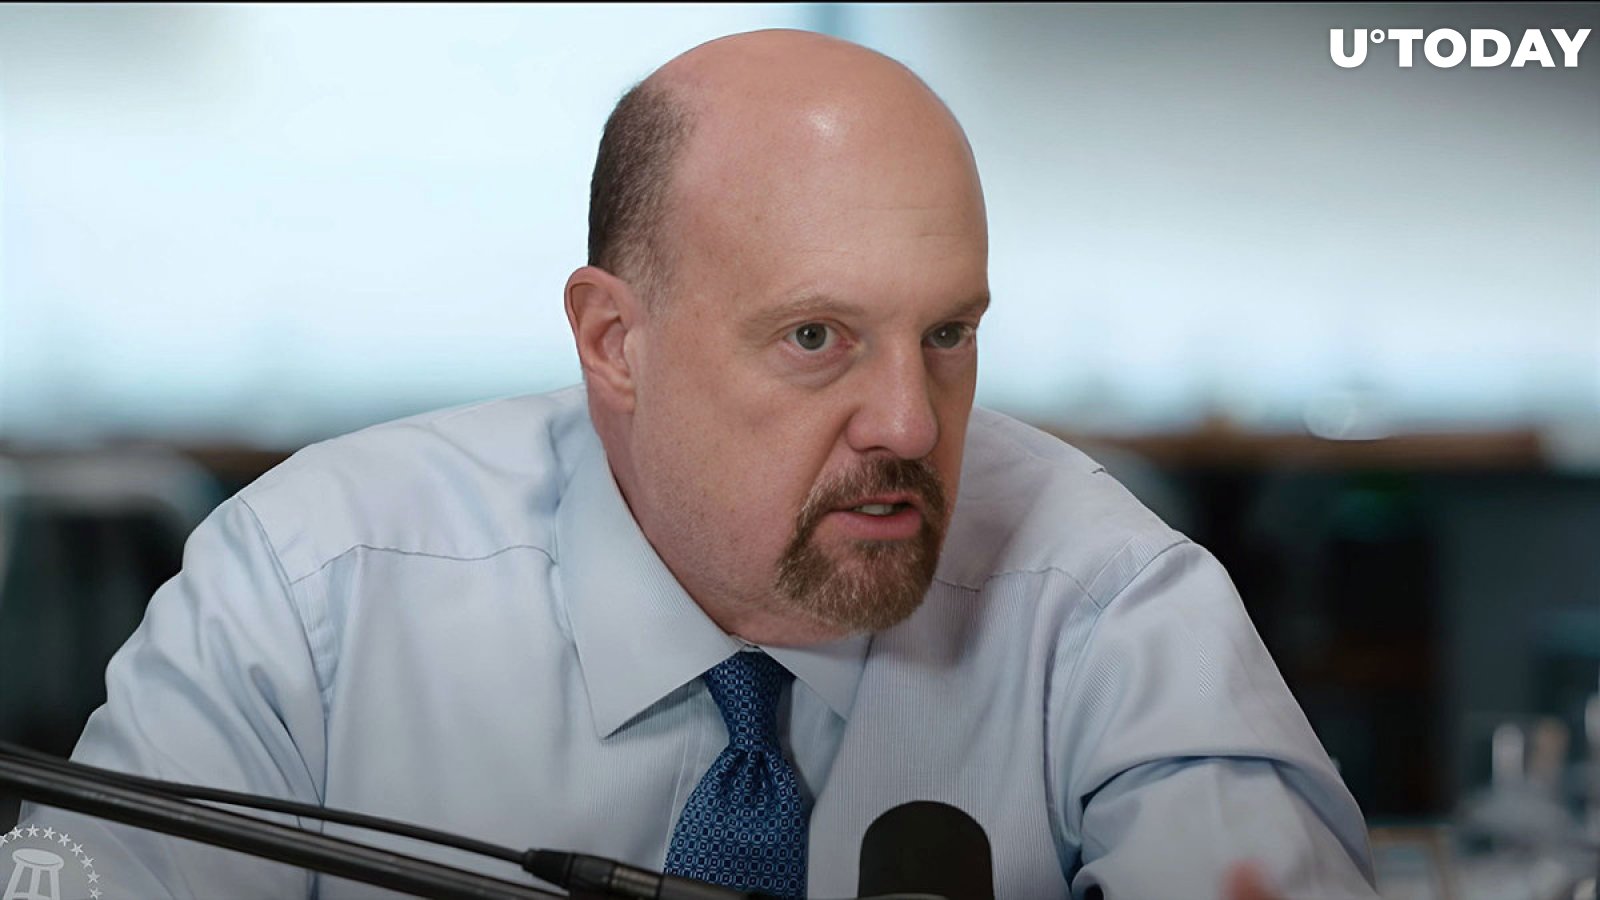 Jim Cramer Issues Warning About Financial Markets, Crypto Reacts